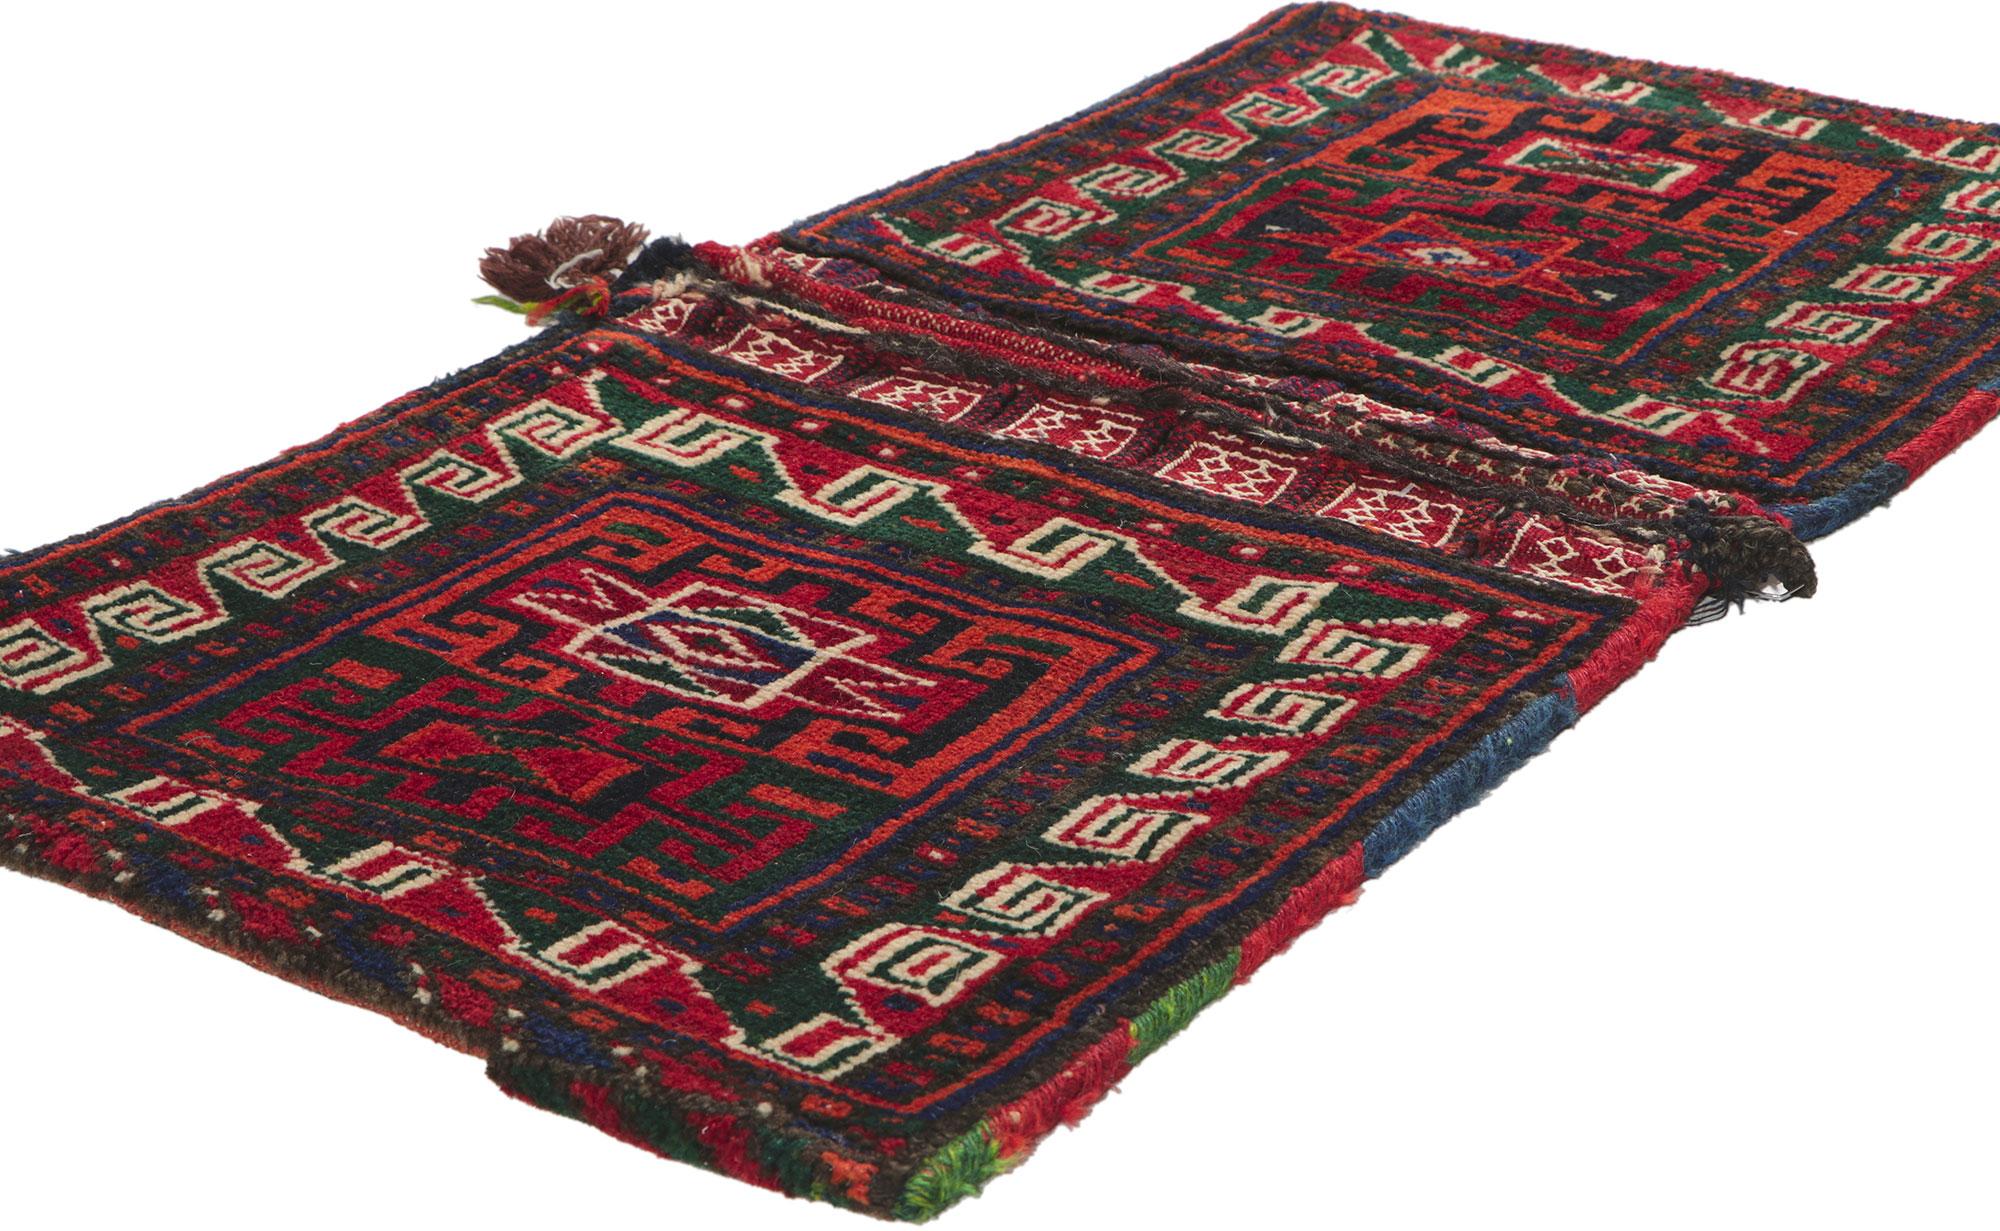 78479 Antique Persian Turkmen Saddlebag, 01'09 x 03'04. Emanating nomadic charm with incredible detail and texture, this hand-knotted wool antique Persian Turkmen saddlebag is a captivating vision of woven beauty. It features an allover geometric